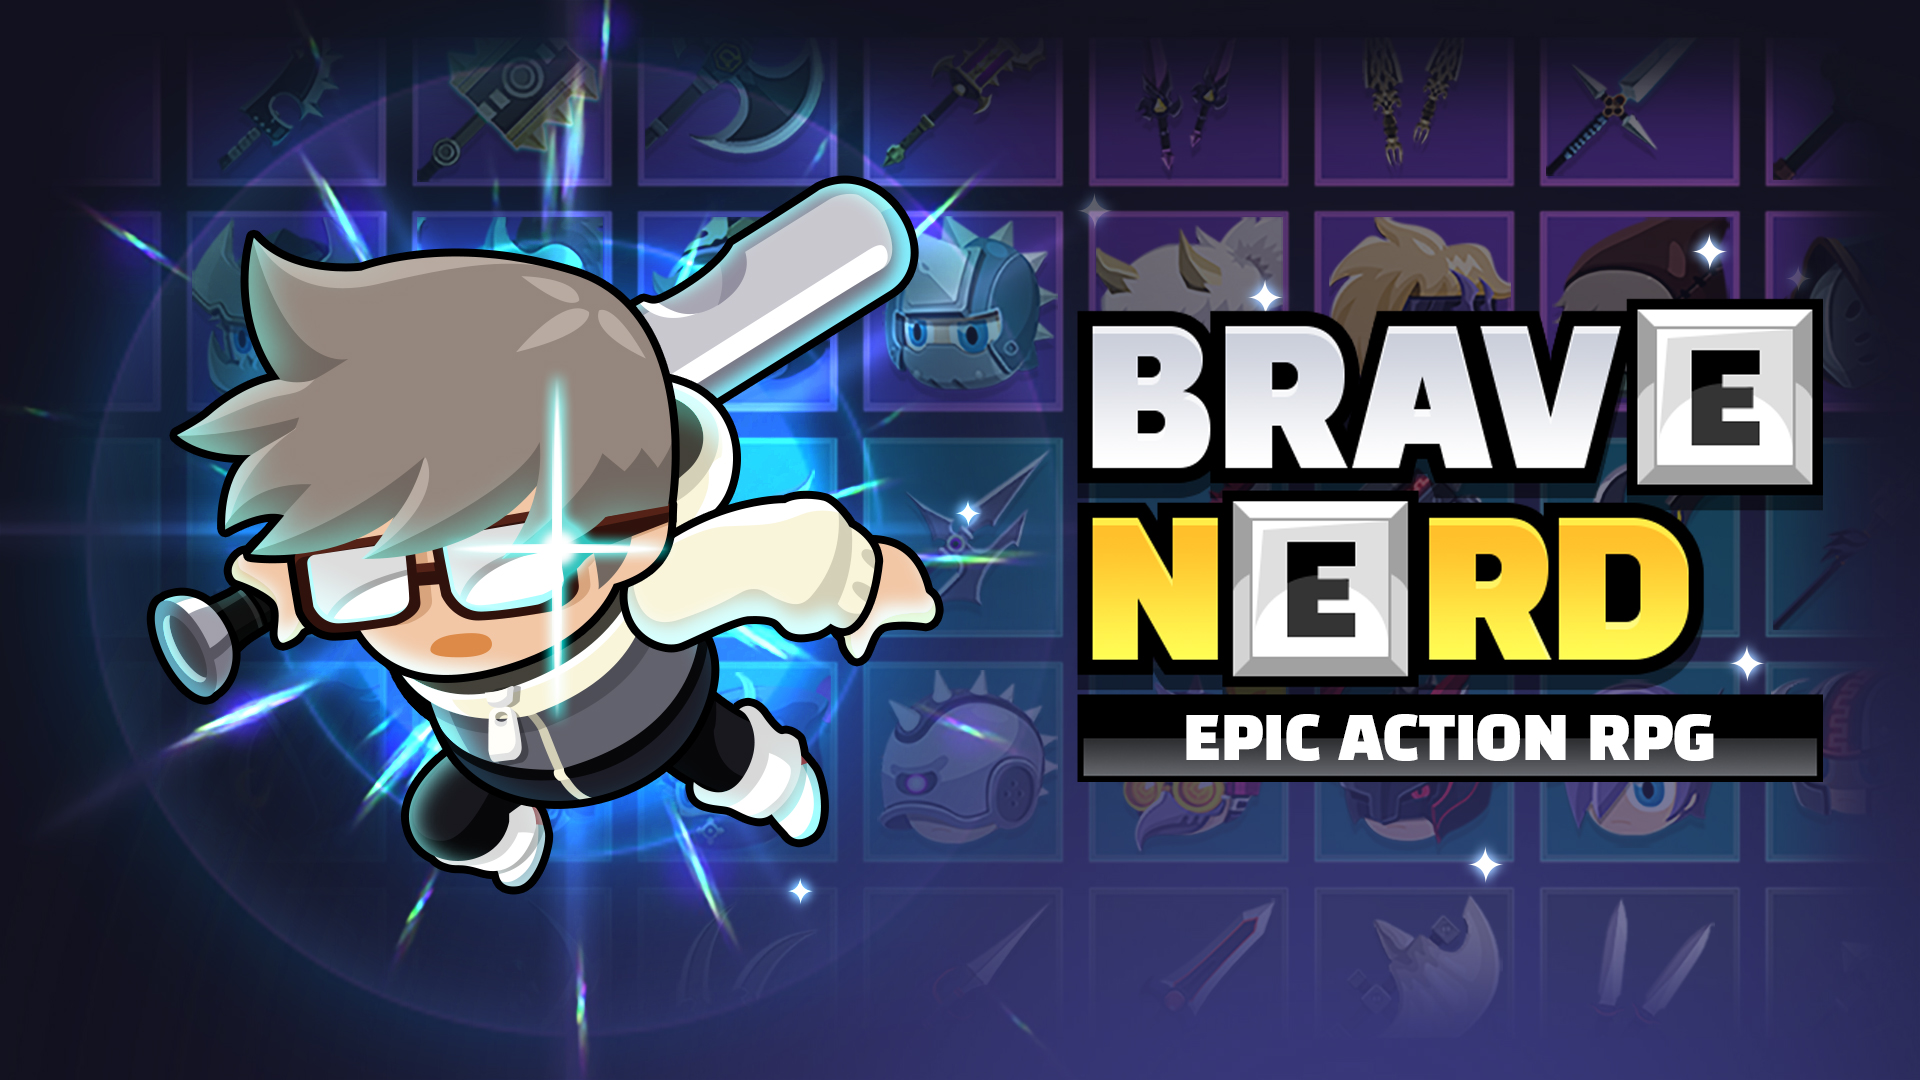 The Brave Nerd for Android